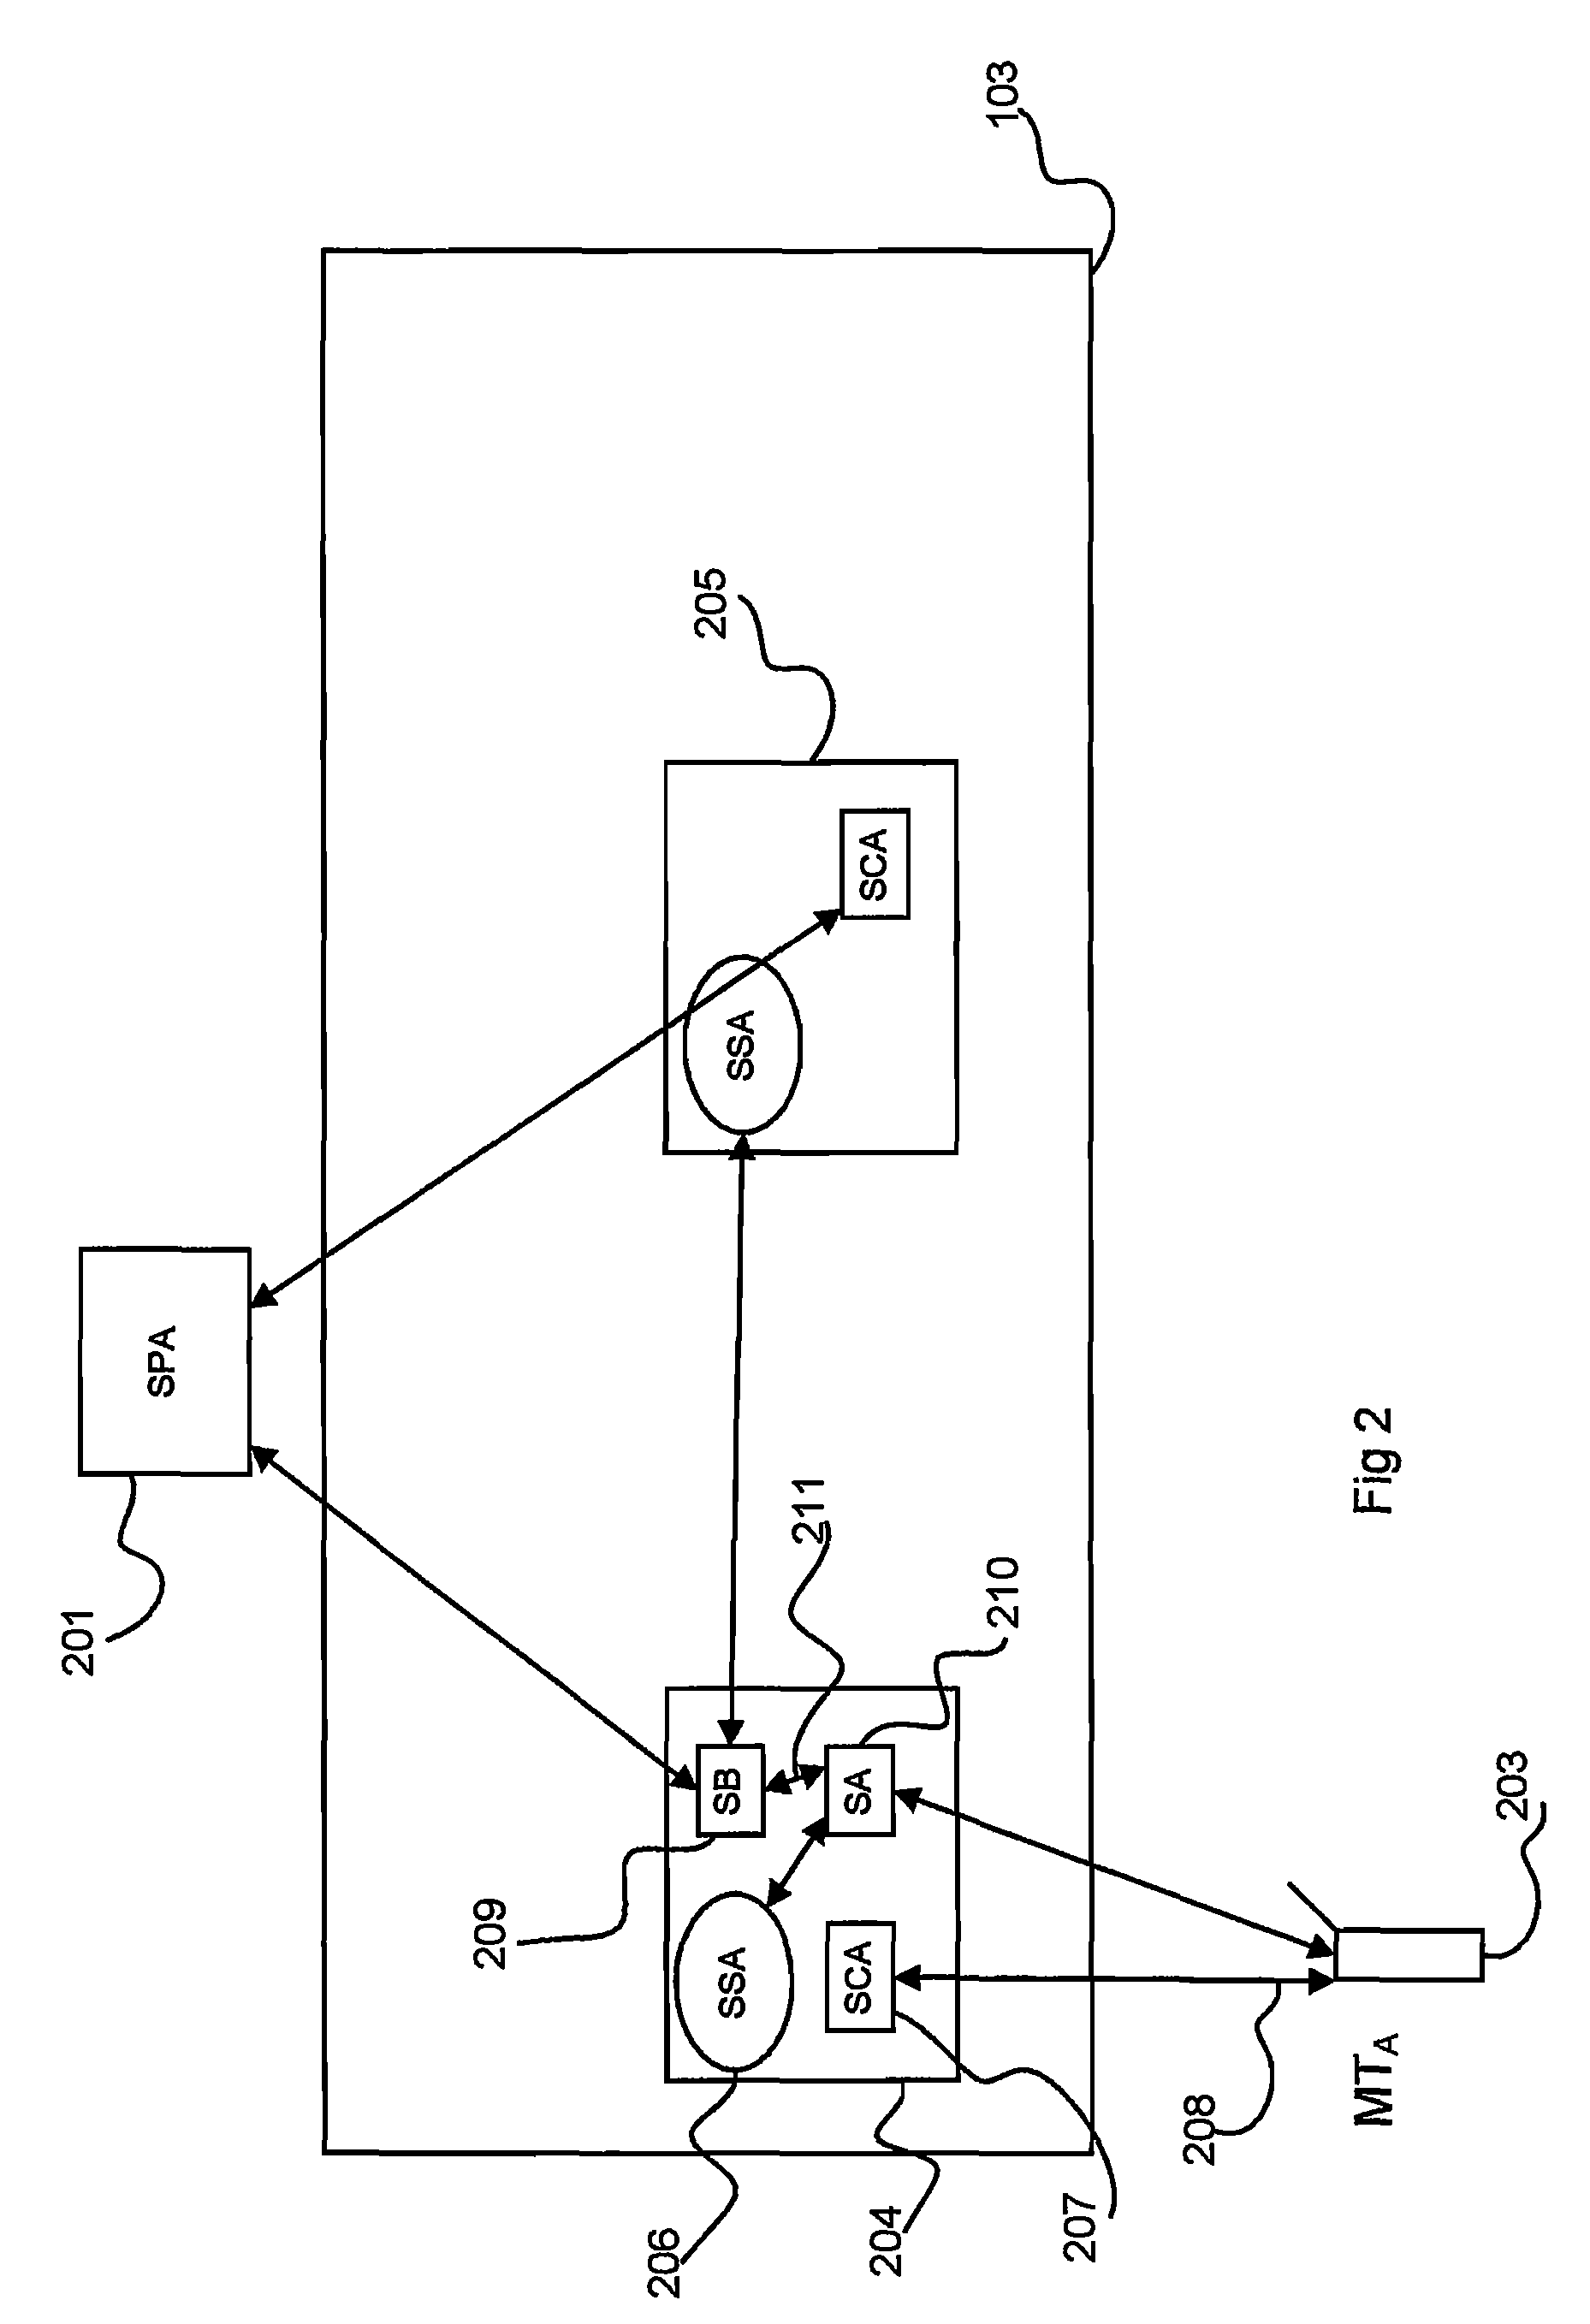 Communication platform and method for packet communication between a service provider and a radio communication device